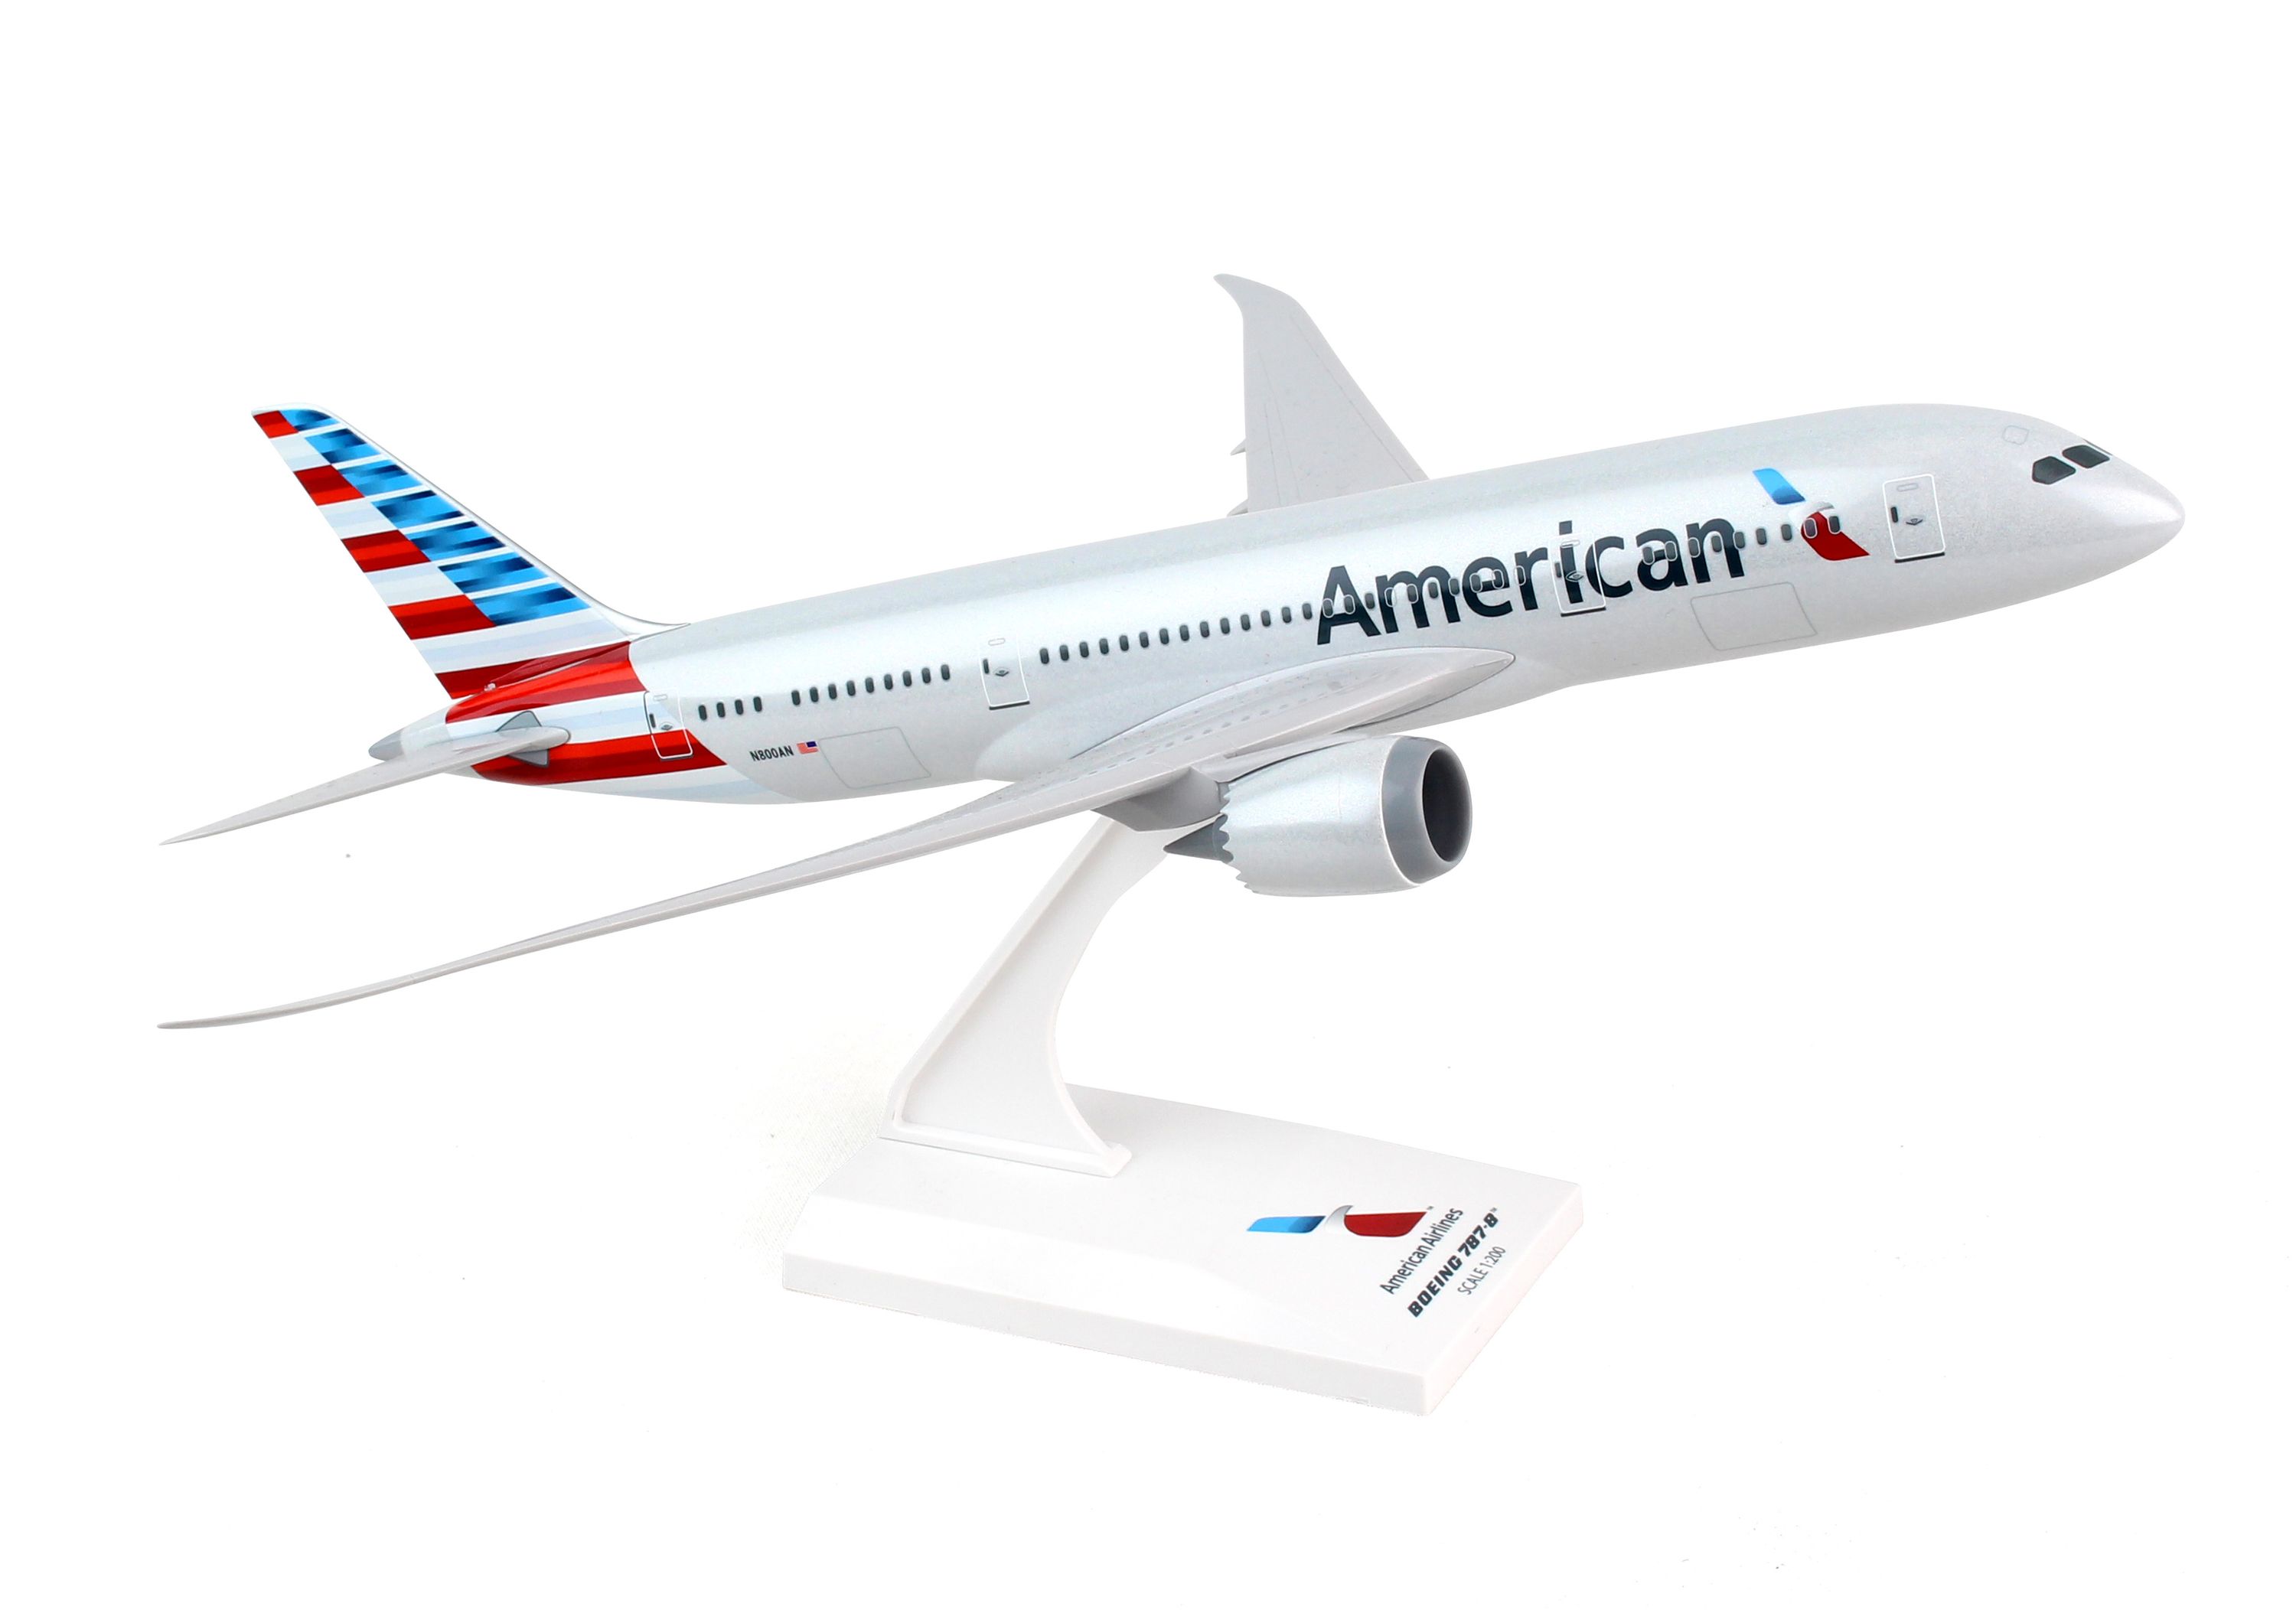 SkyMarks Flugzeugmodell American Airlines Boeing 787-8 Maßstab 1:200